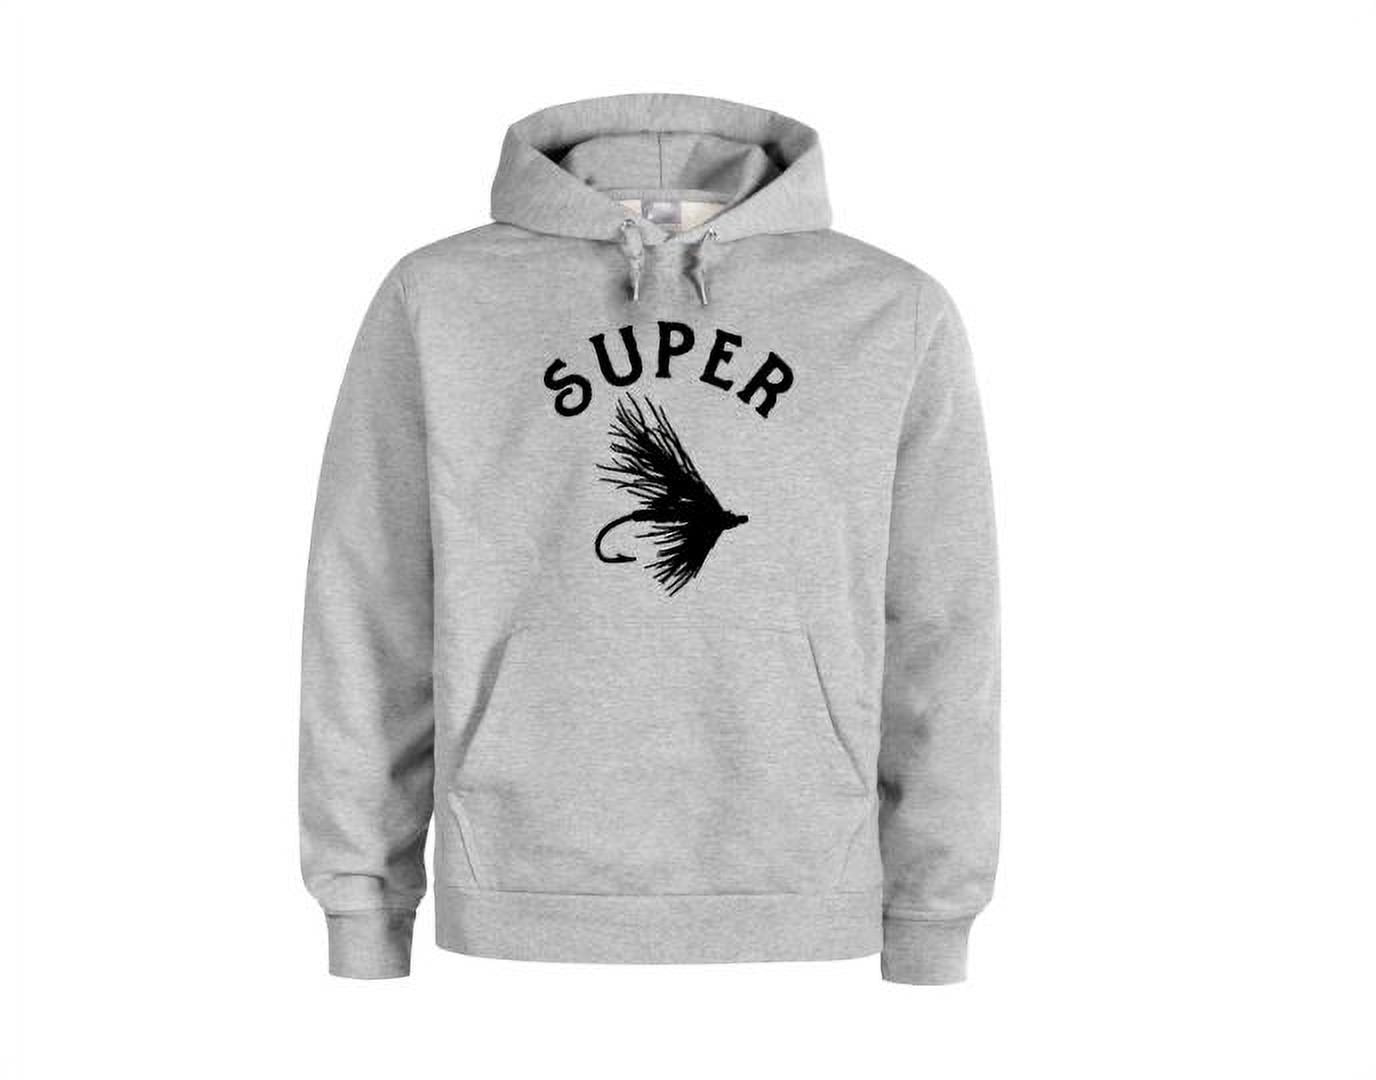 Fly Fishing Hoodie, Super Fly, Outdoors Wear, Fishing Apparel, Unisex  Hoodies, Fly Fishing Apparel, Fishing Gear, Graphic Hoodie, Fishing, Grey  (Black